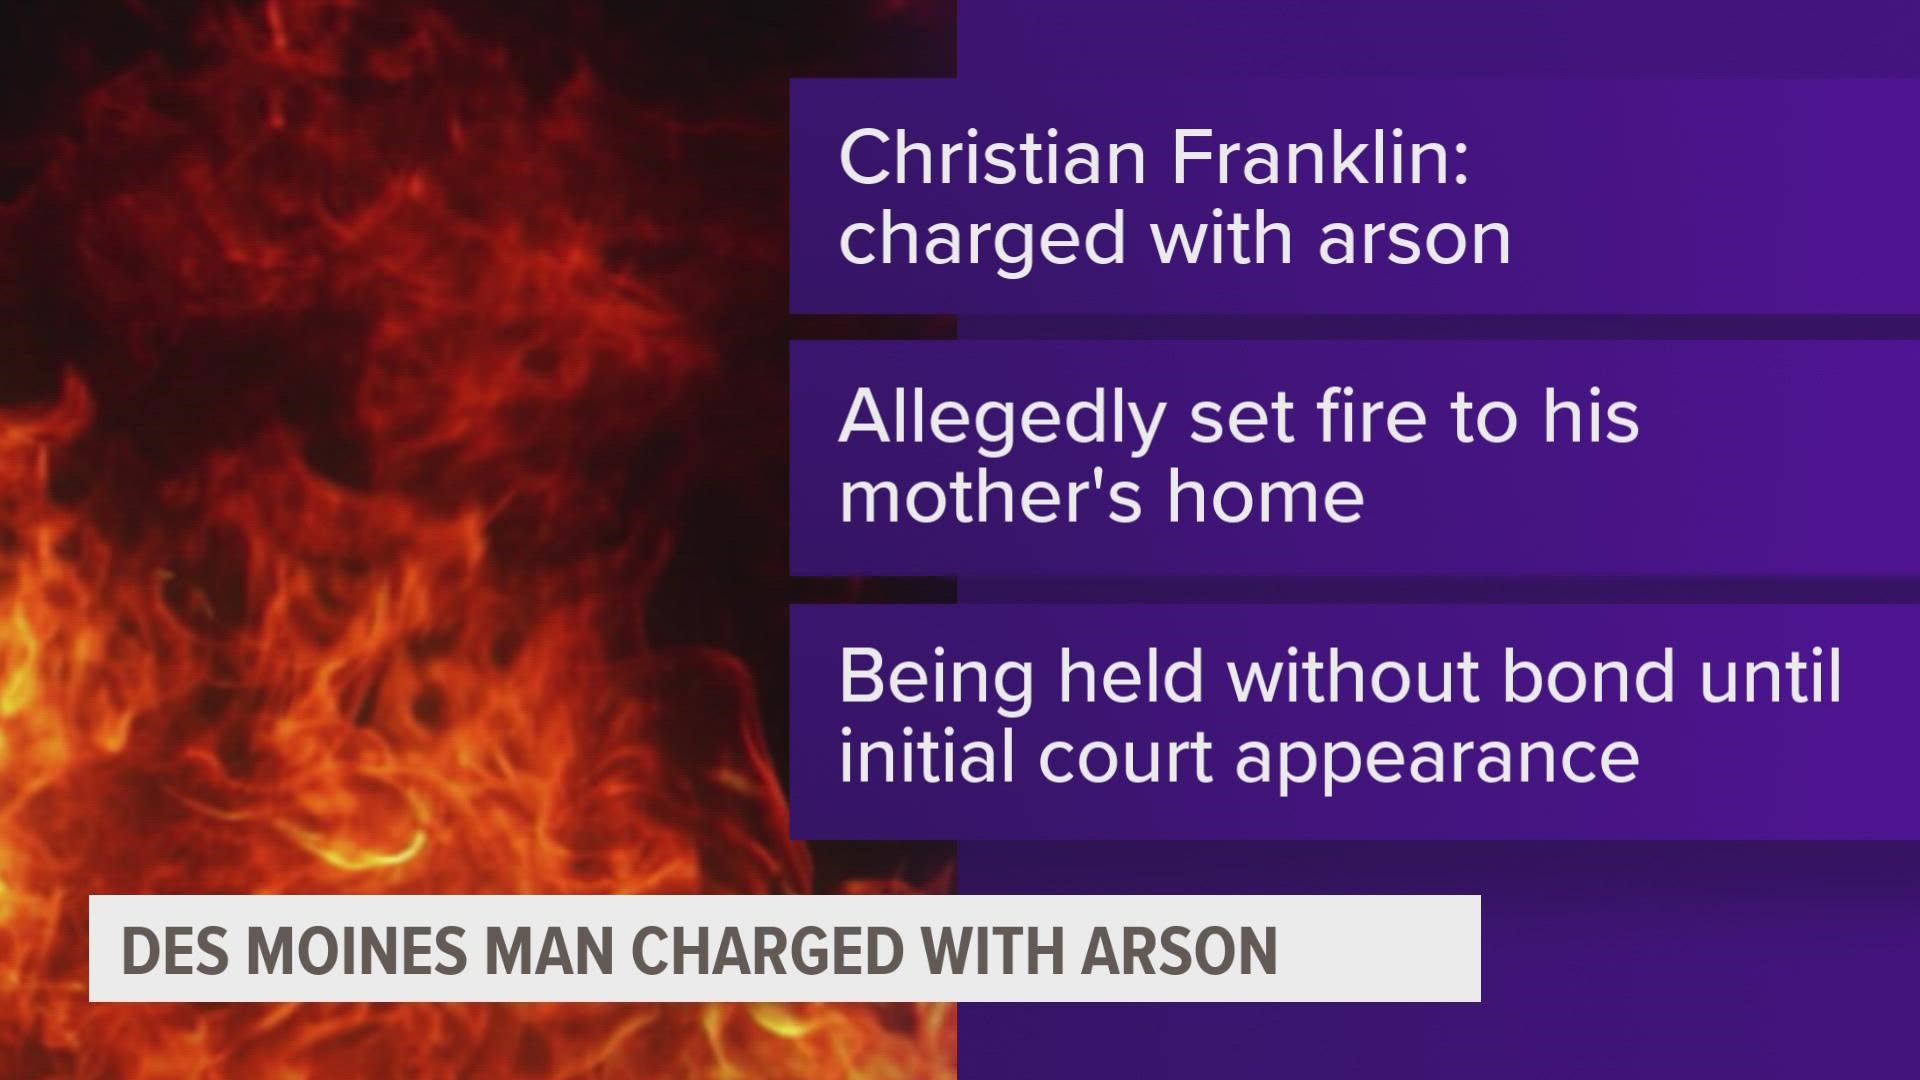 He allegedly set fire to his mother's home around 10:30 a.m. yesterday.